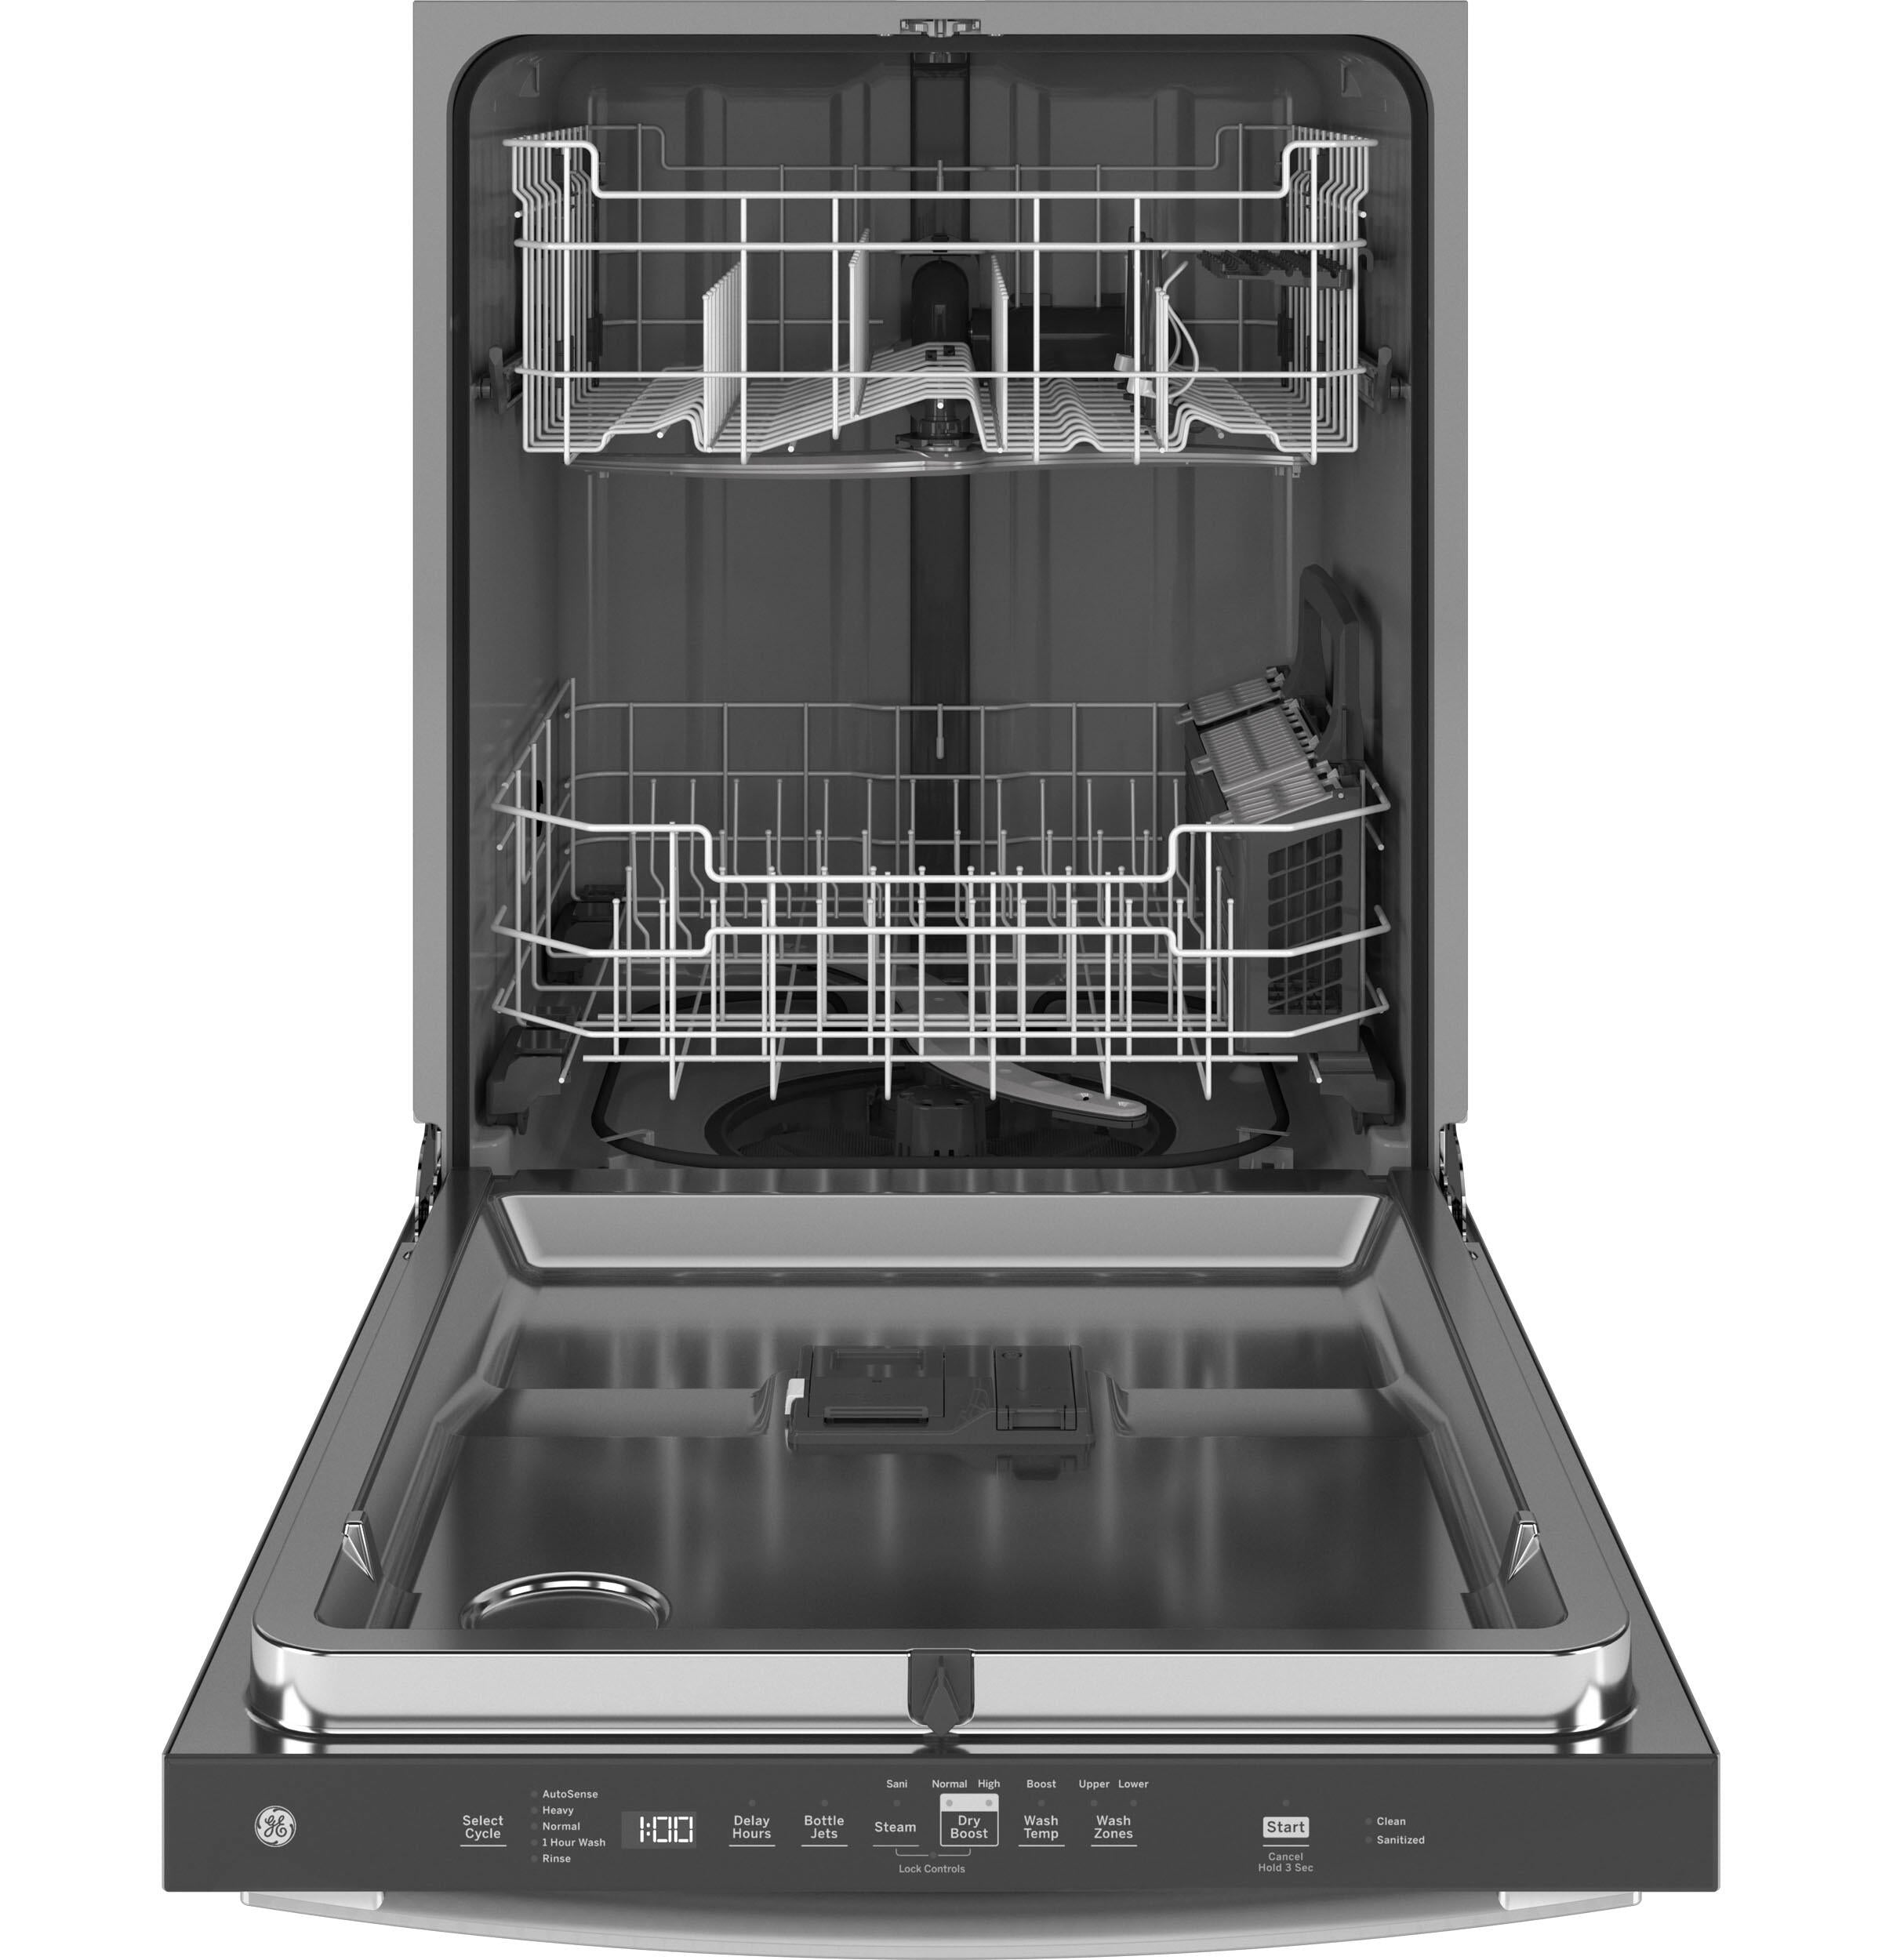 What to do If Your GE Dishwasher Won't Start